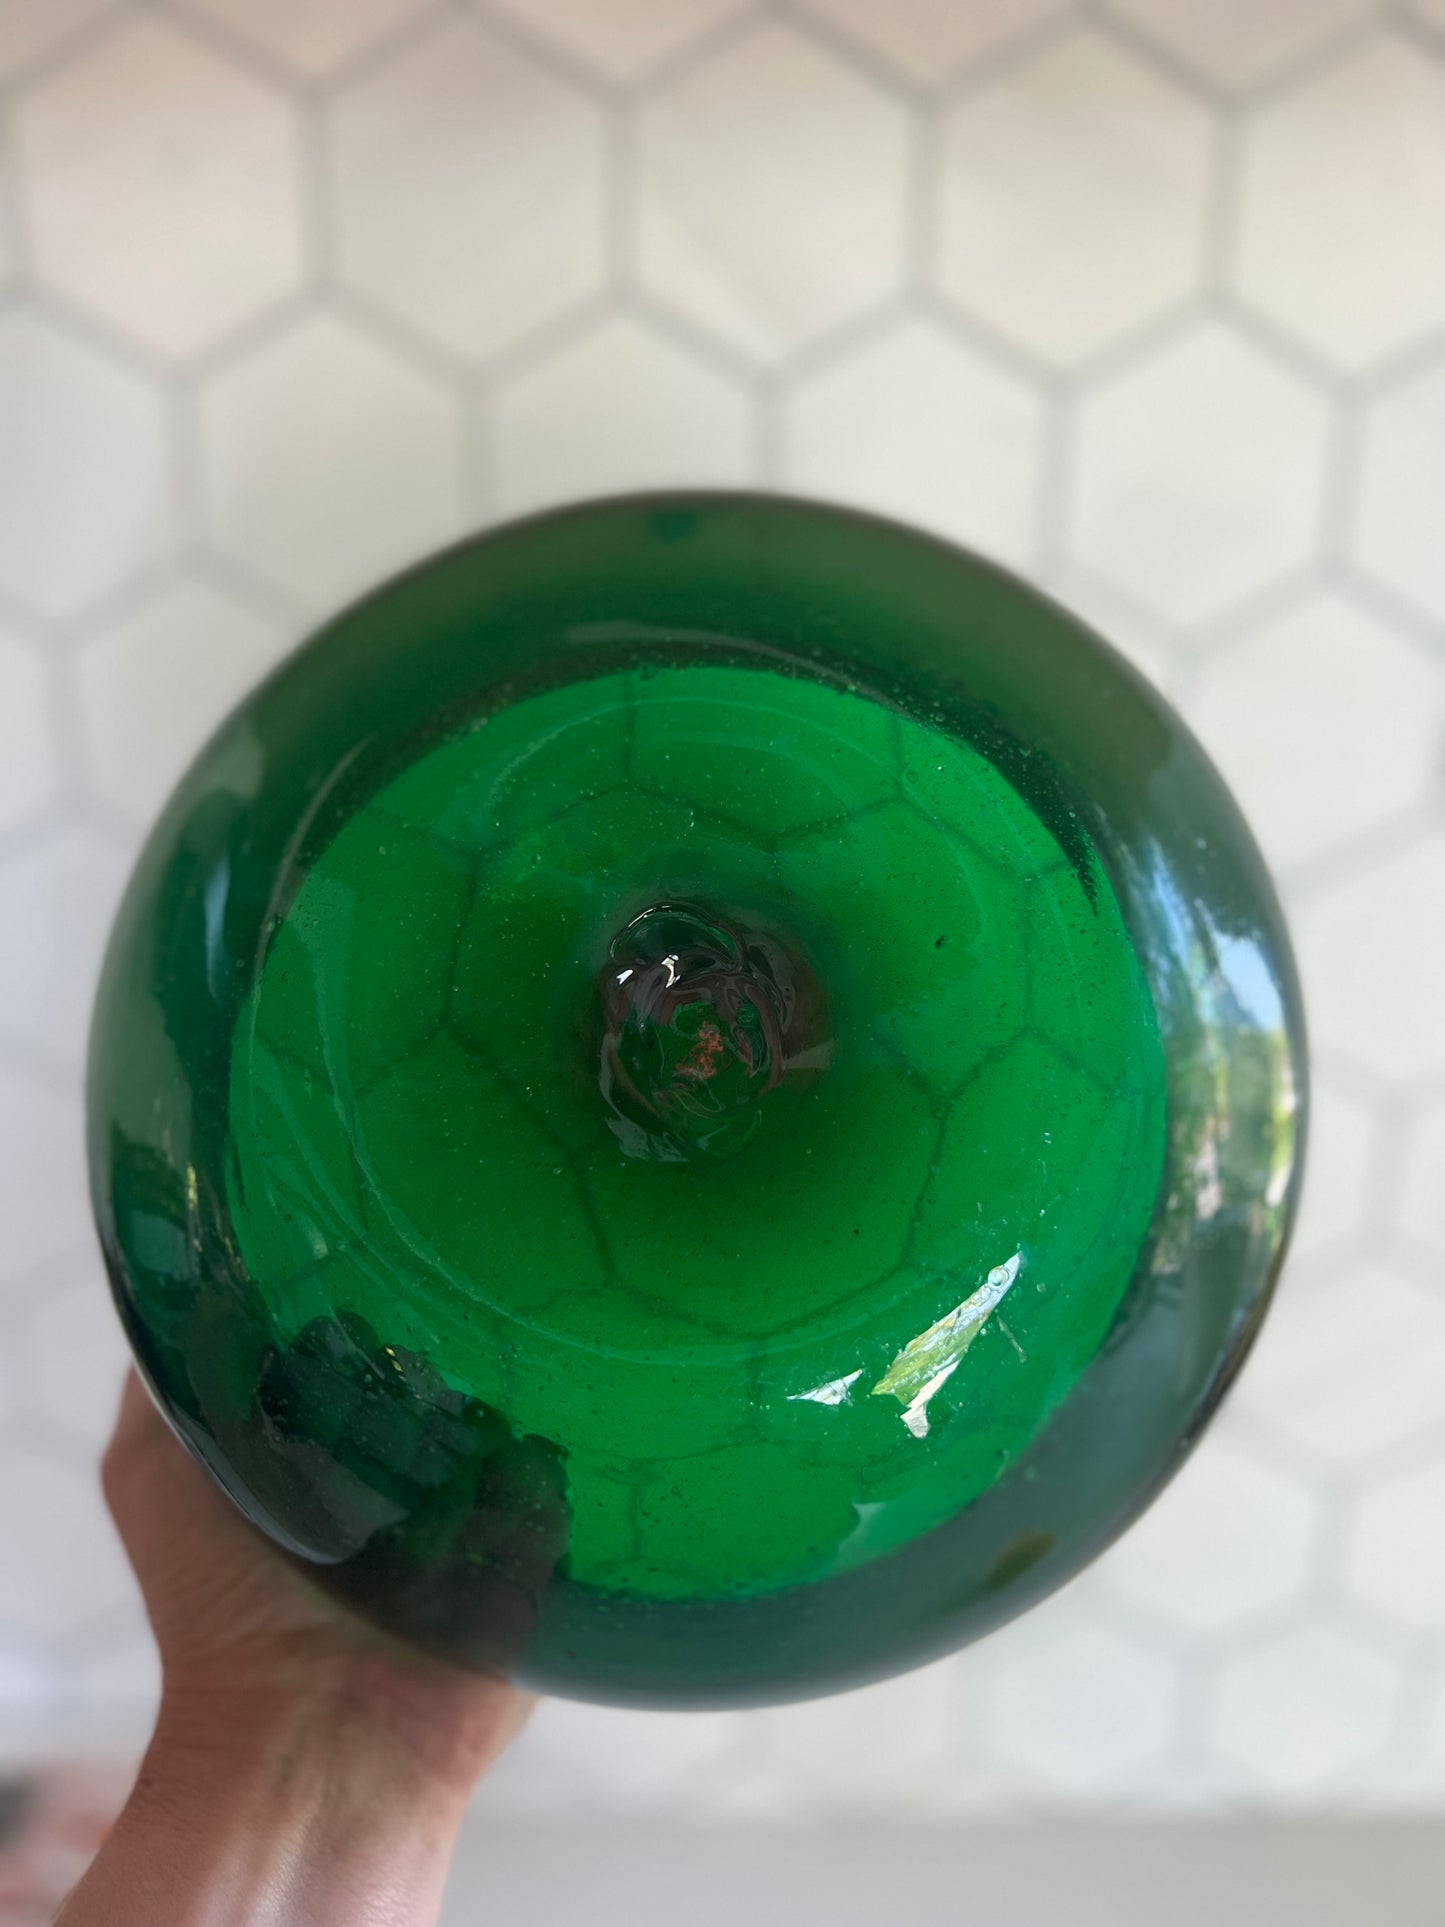 Another Emerald City Bowl